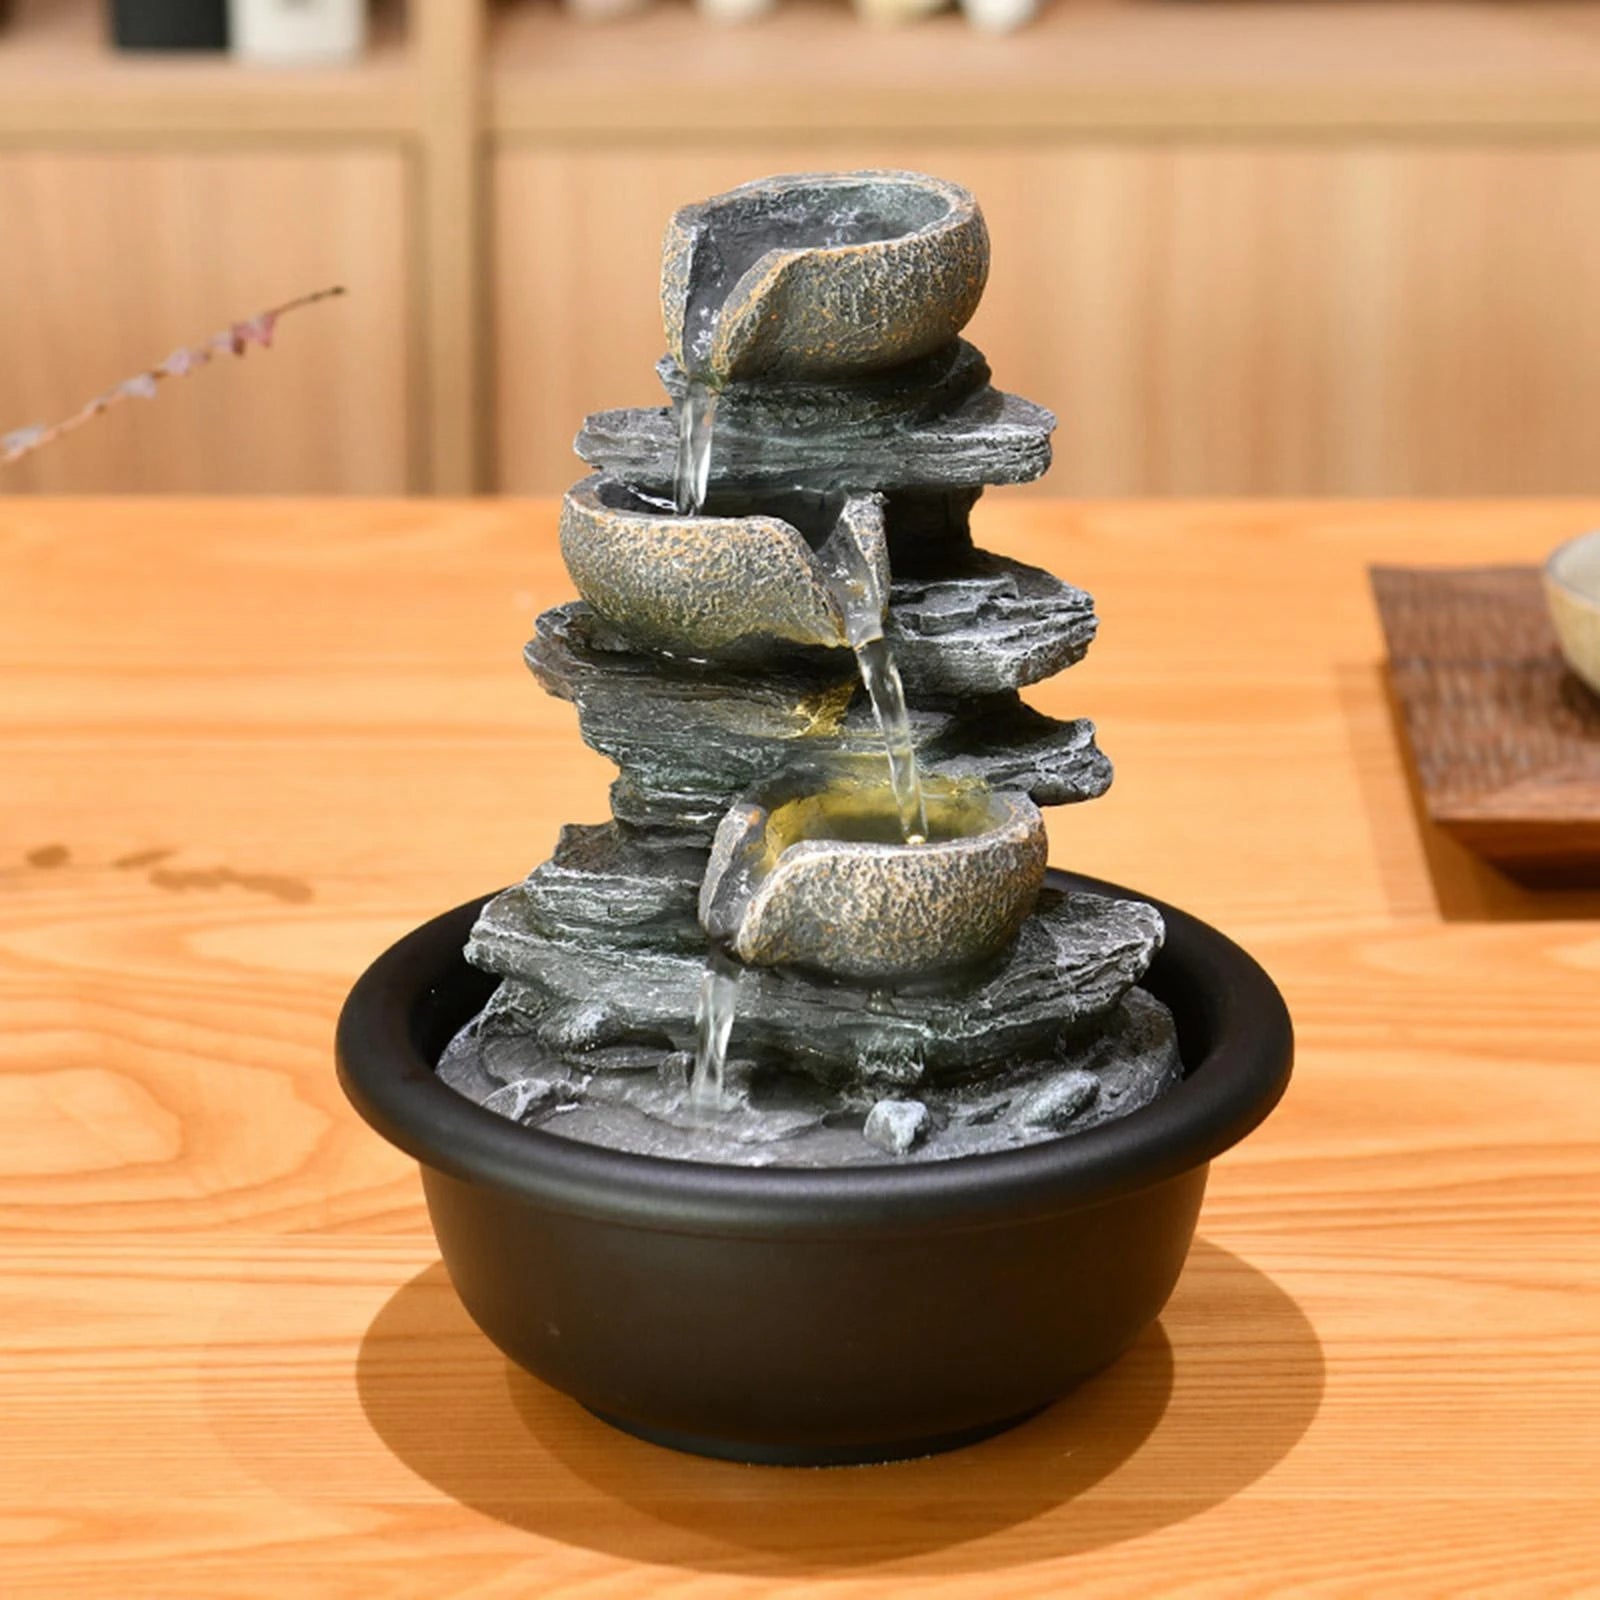 Tiered Tabletop Fountain with Scene Light Meditation Indoor Waterfall Fountains for Home Housewarming Living Room Hotel Office